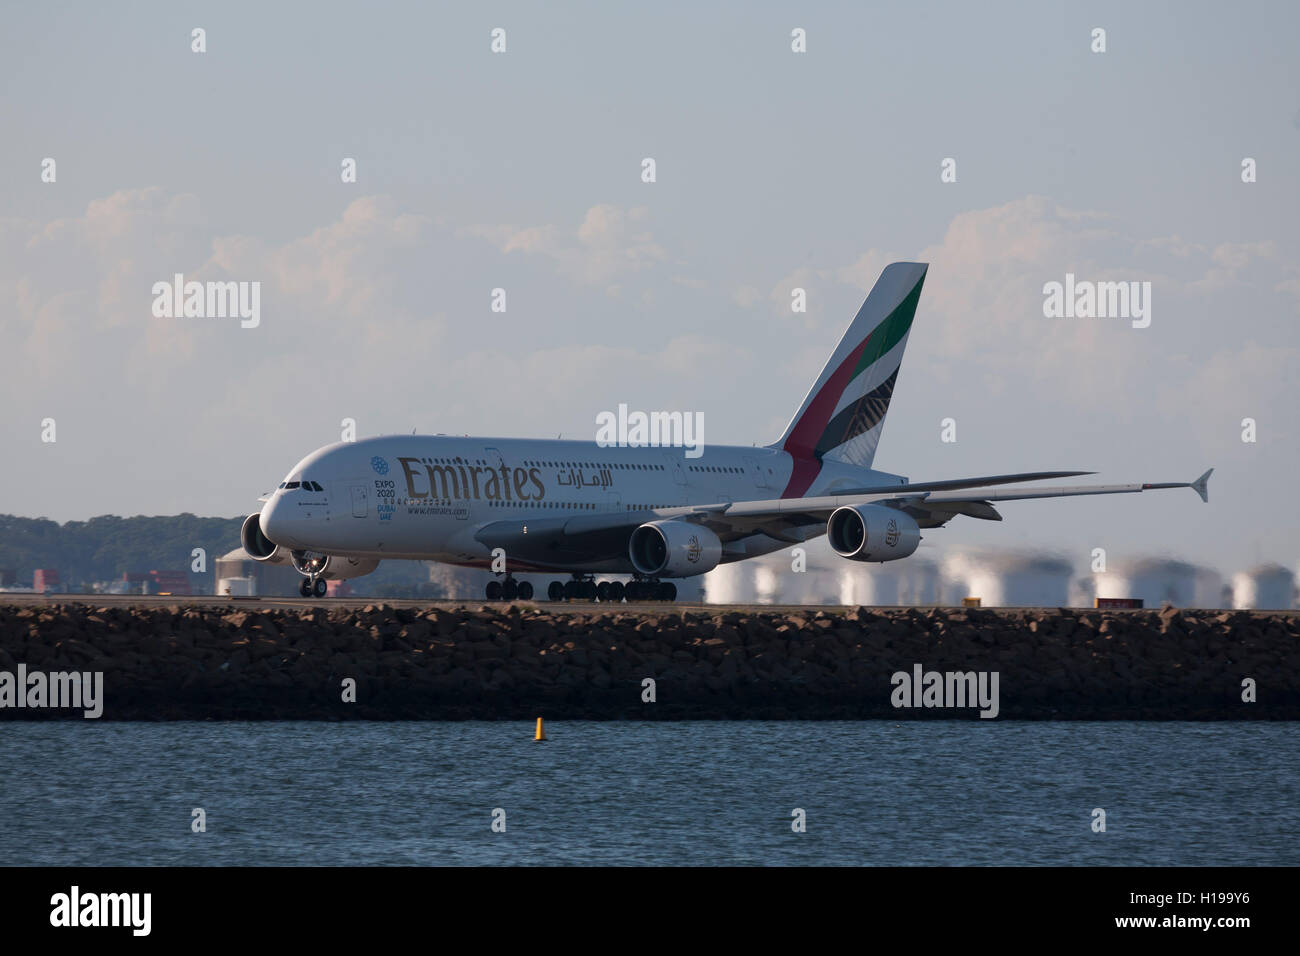 Emirates airlines A380 departing from Kingsford Smith International Airport Mascot Sydney Australia Stock Photo